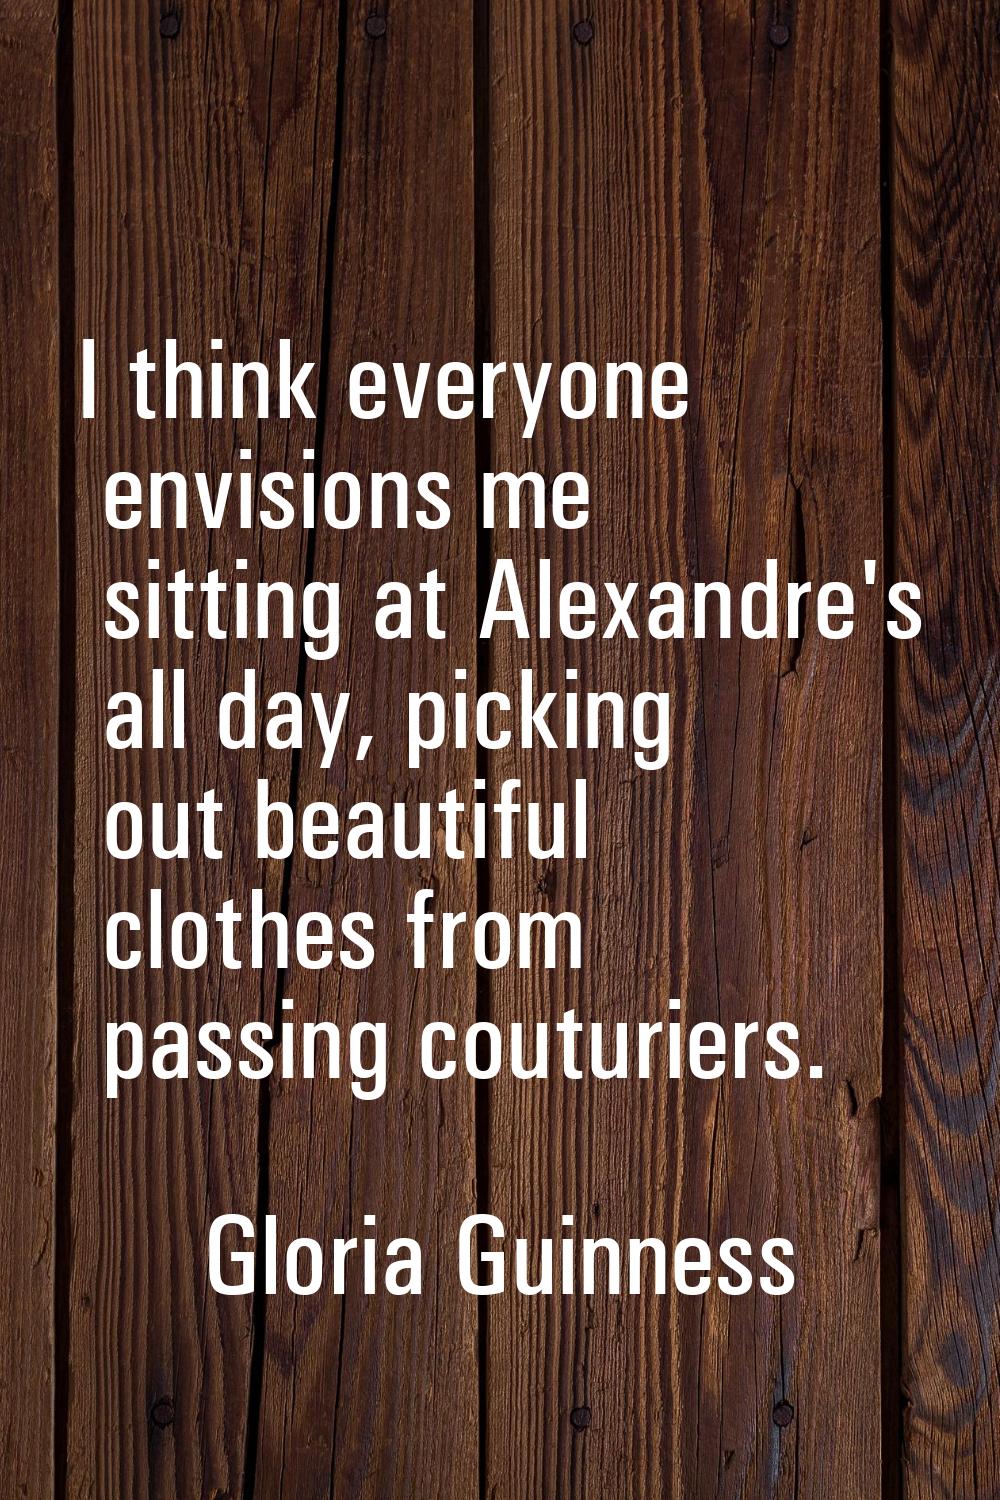 I think everyone envisions me sitting at Alexandre's all day, picking out beautiful clothes from pa